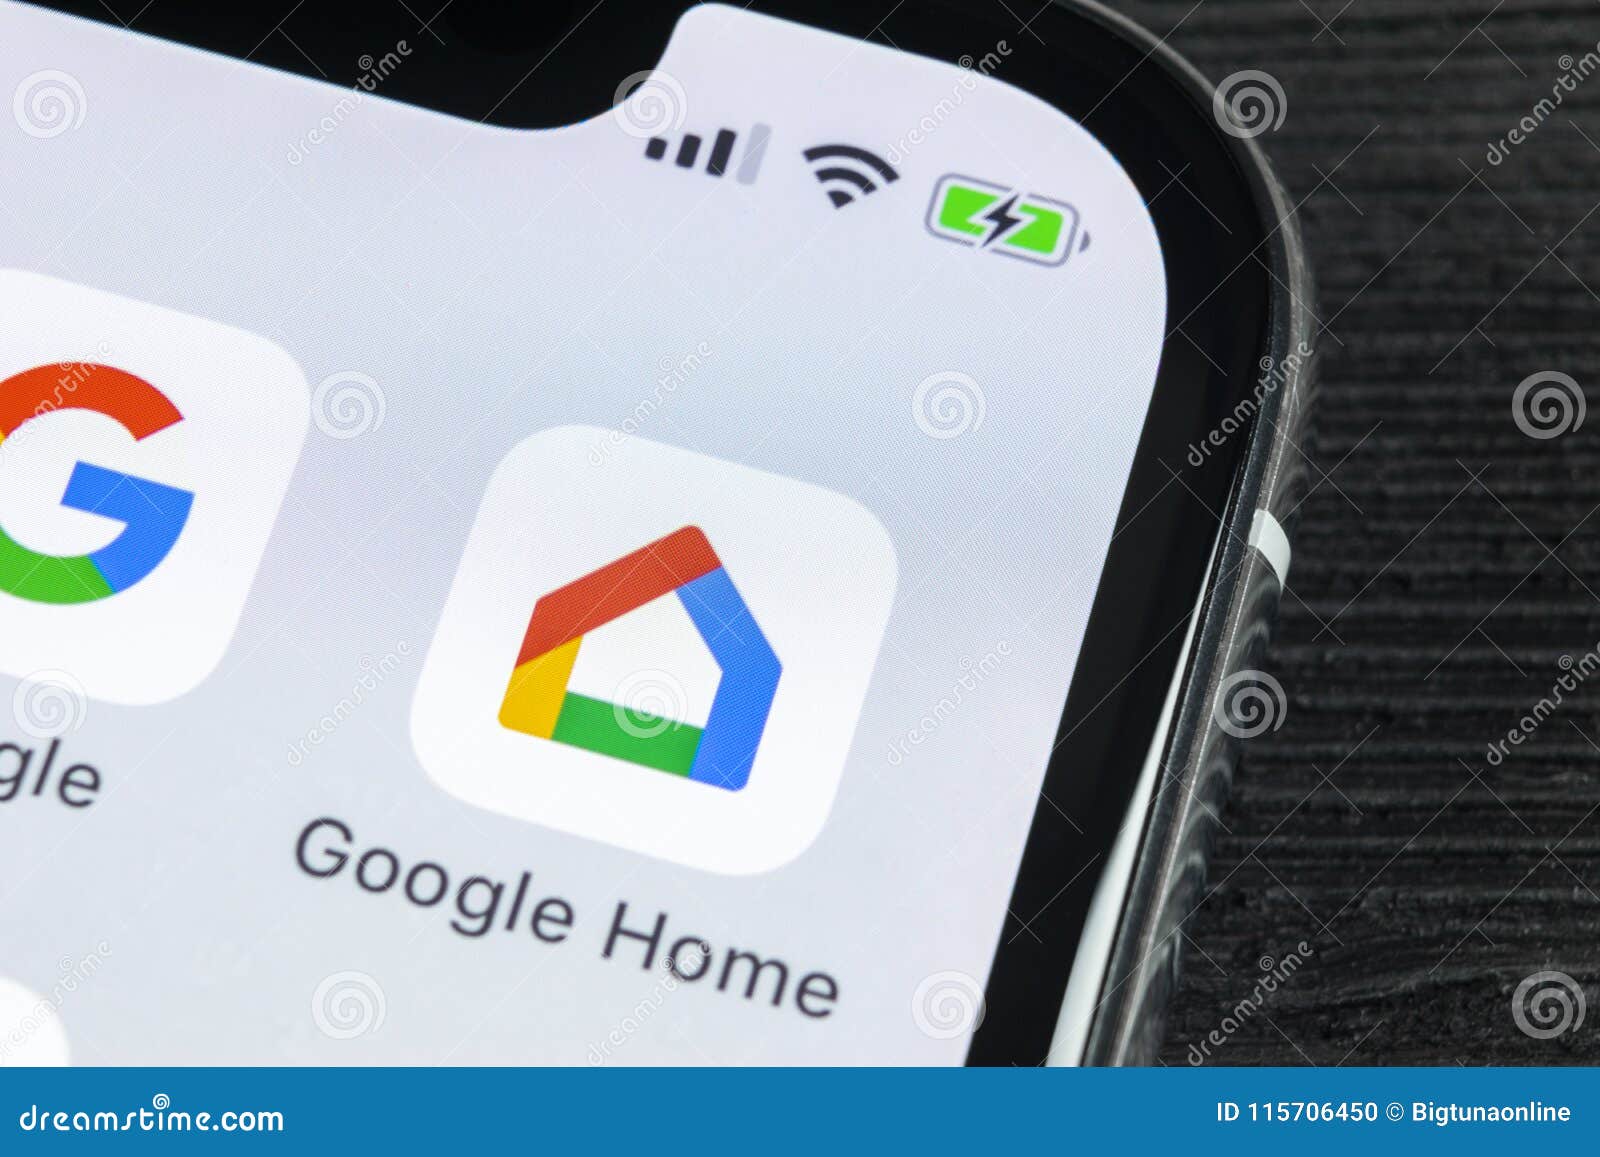 Google Home Application Icon On Apple Iphone X Smartphone Screen